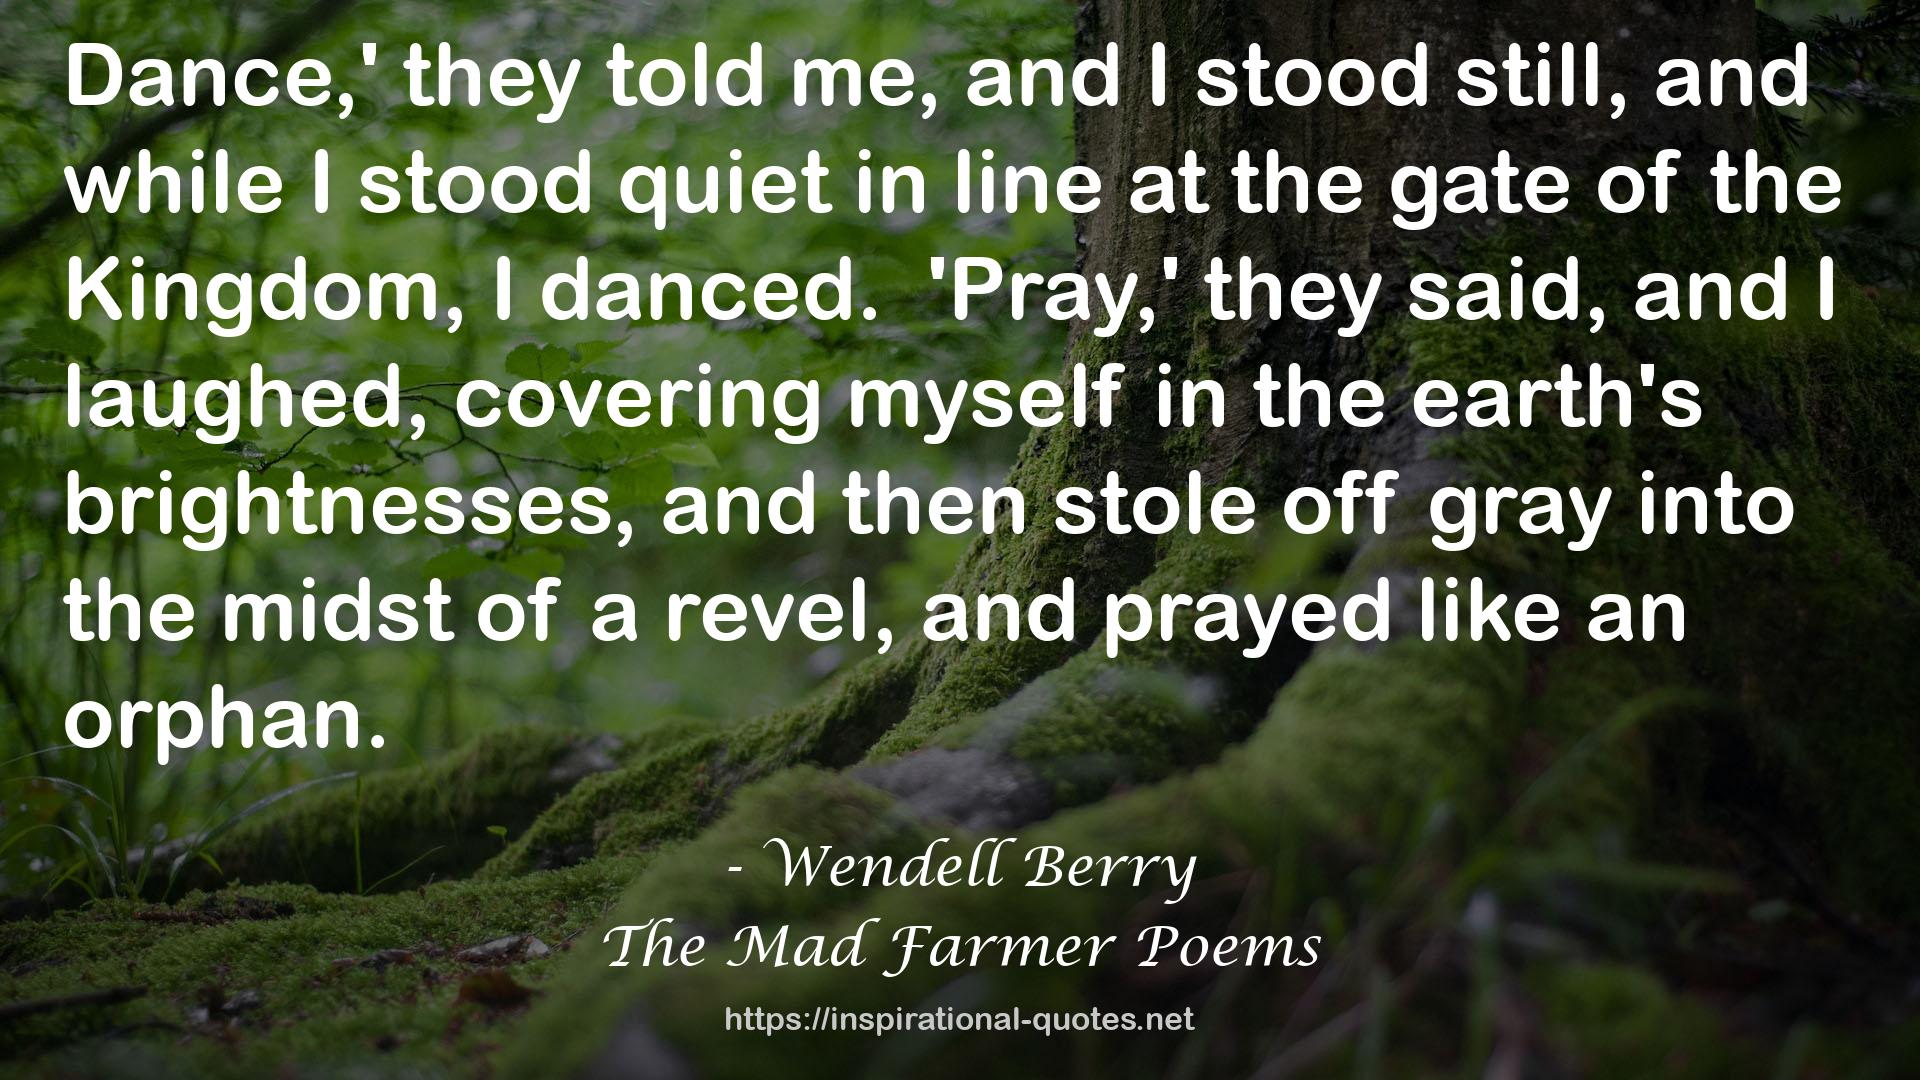 The Mad Farmer Poems QUOTES